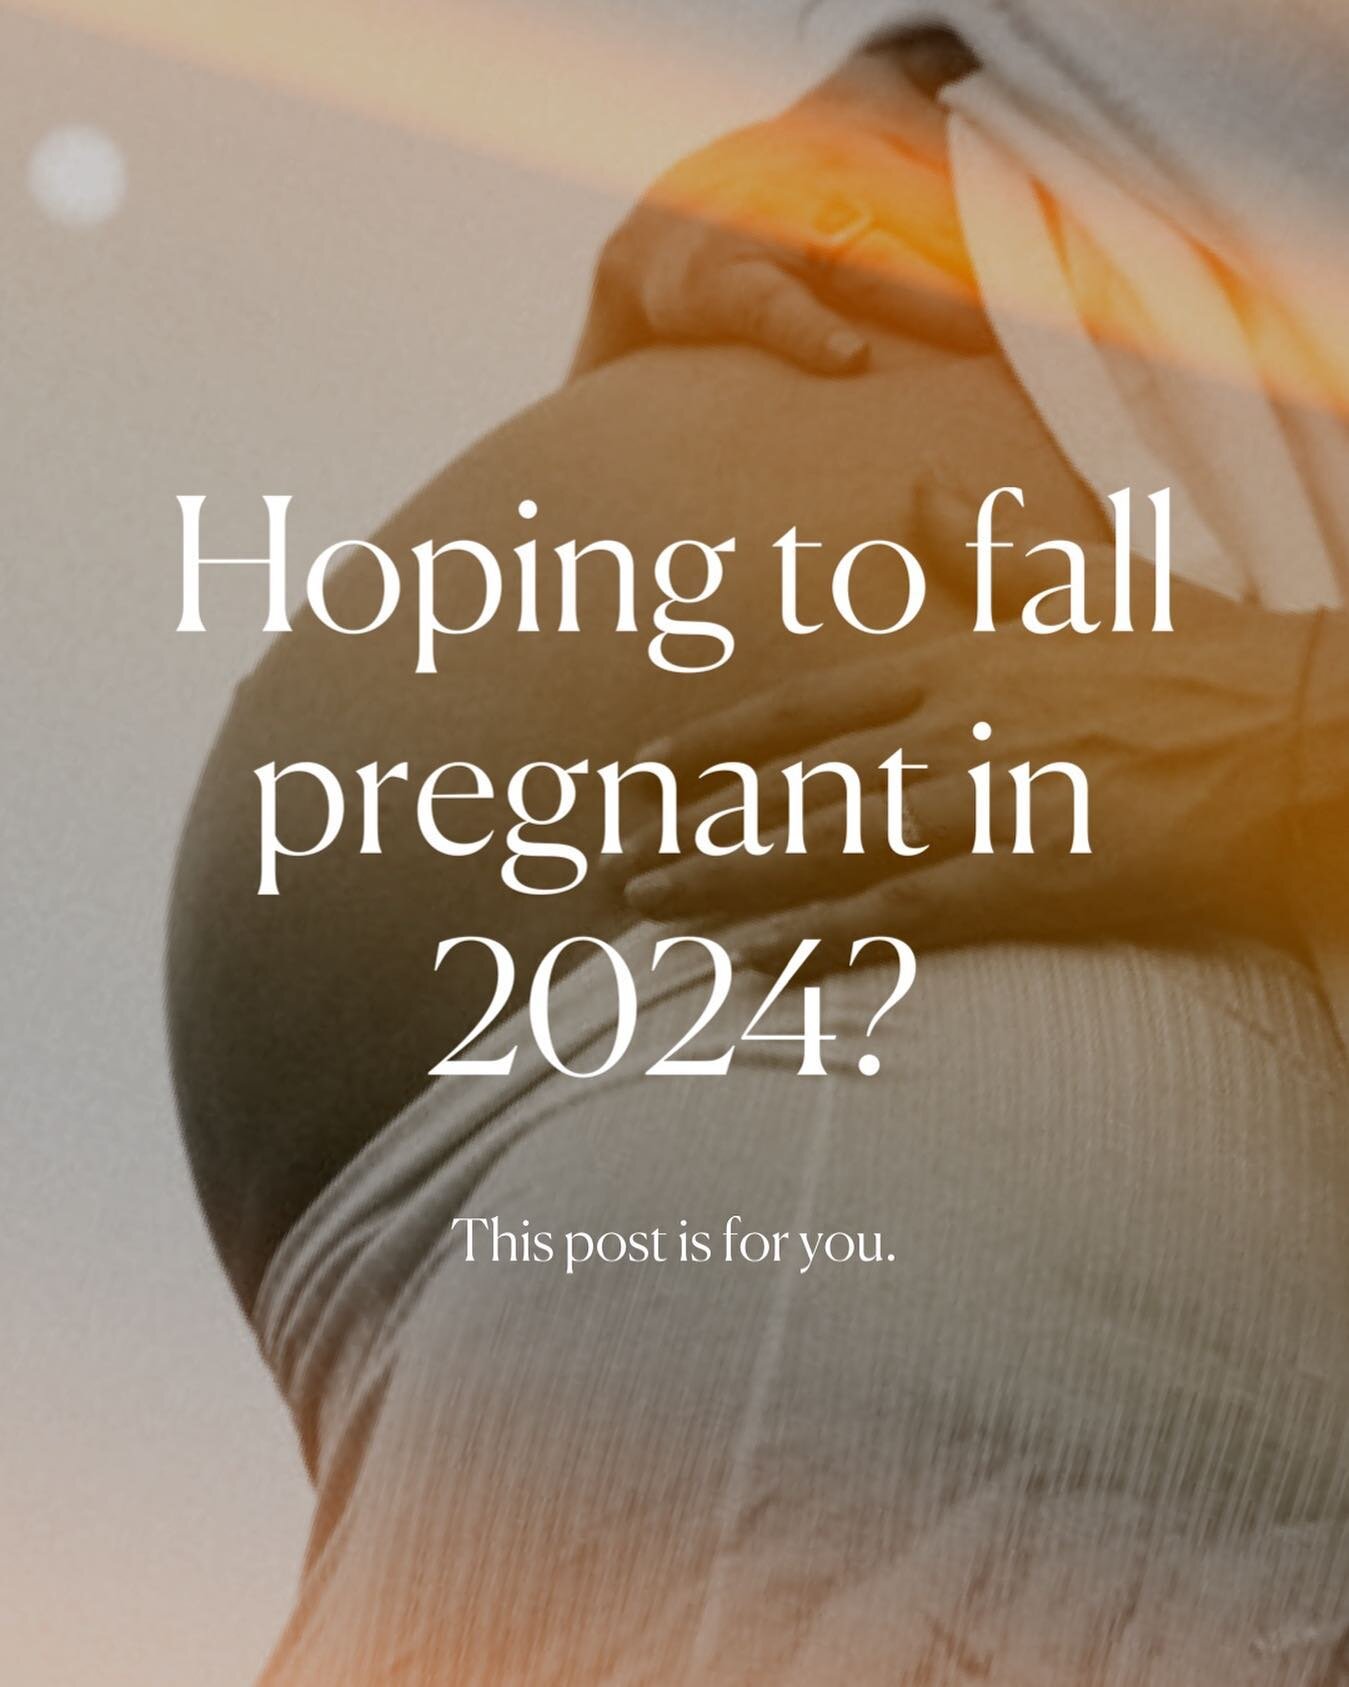 If you are thinking of trying to conceive or hoping to become pregnant in 2024, this is an excellent moment to start laying the foundation for healthy conception and pregnancy and to gain an insight into where you are now with your fertility and over